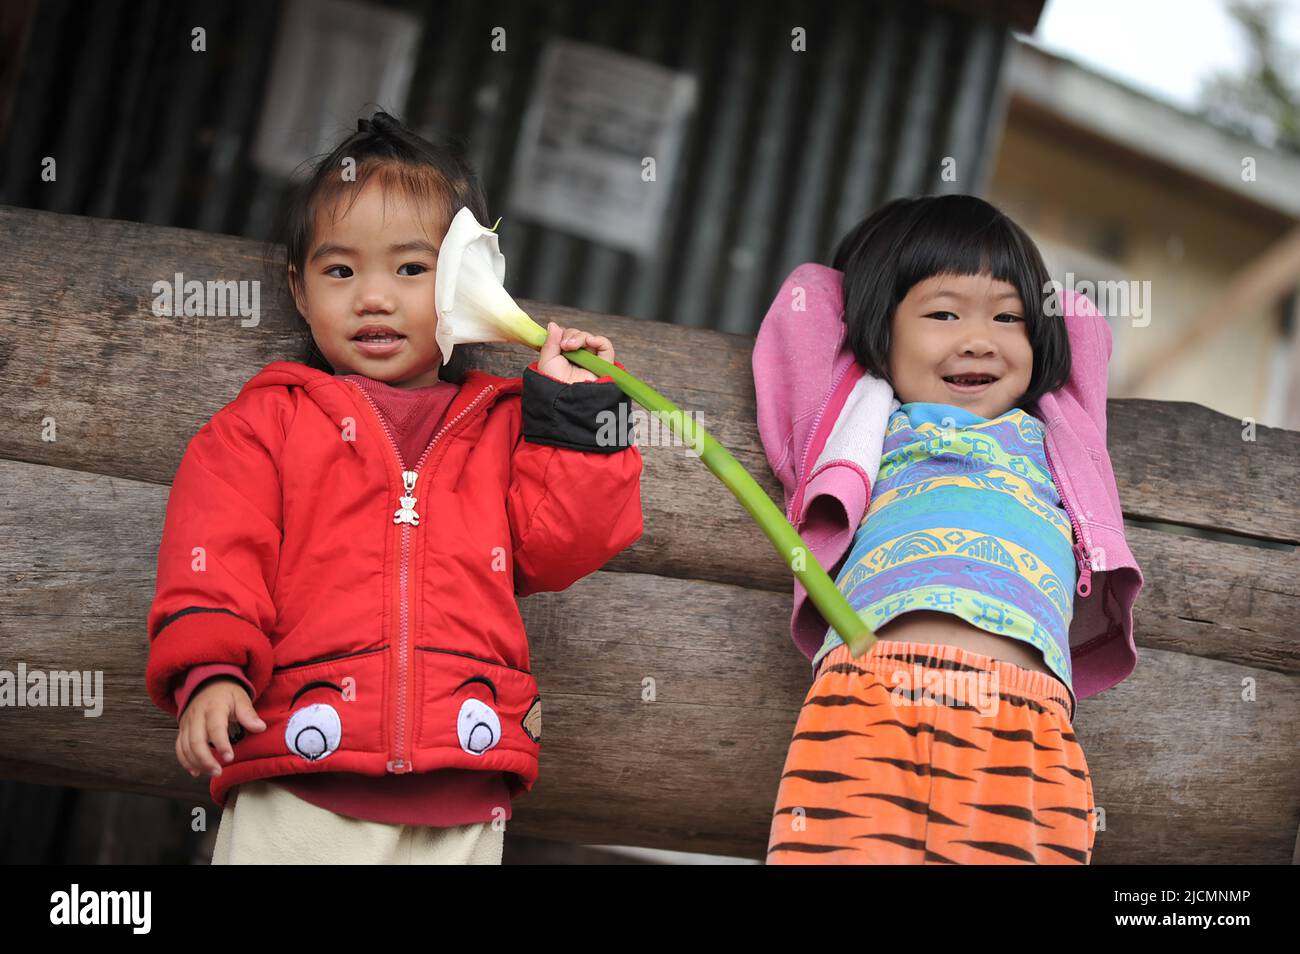 Mountain Province, Philippines: two locals, young girls wearing colorful clothes, engaging with tourists passing by their neighborhood in Sagada. Stock Photo